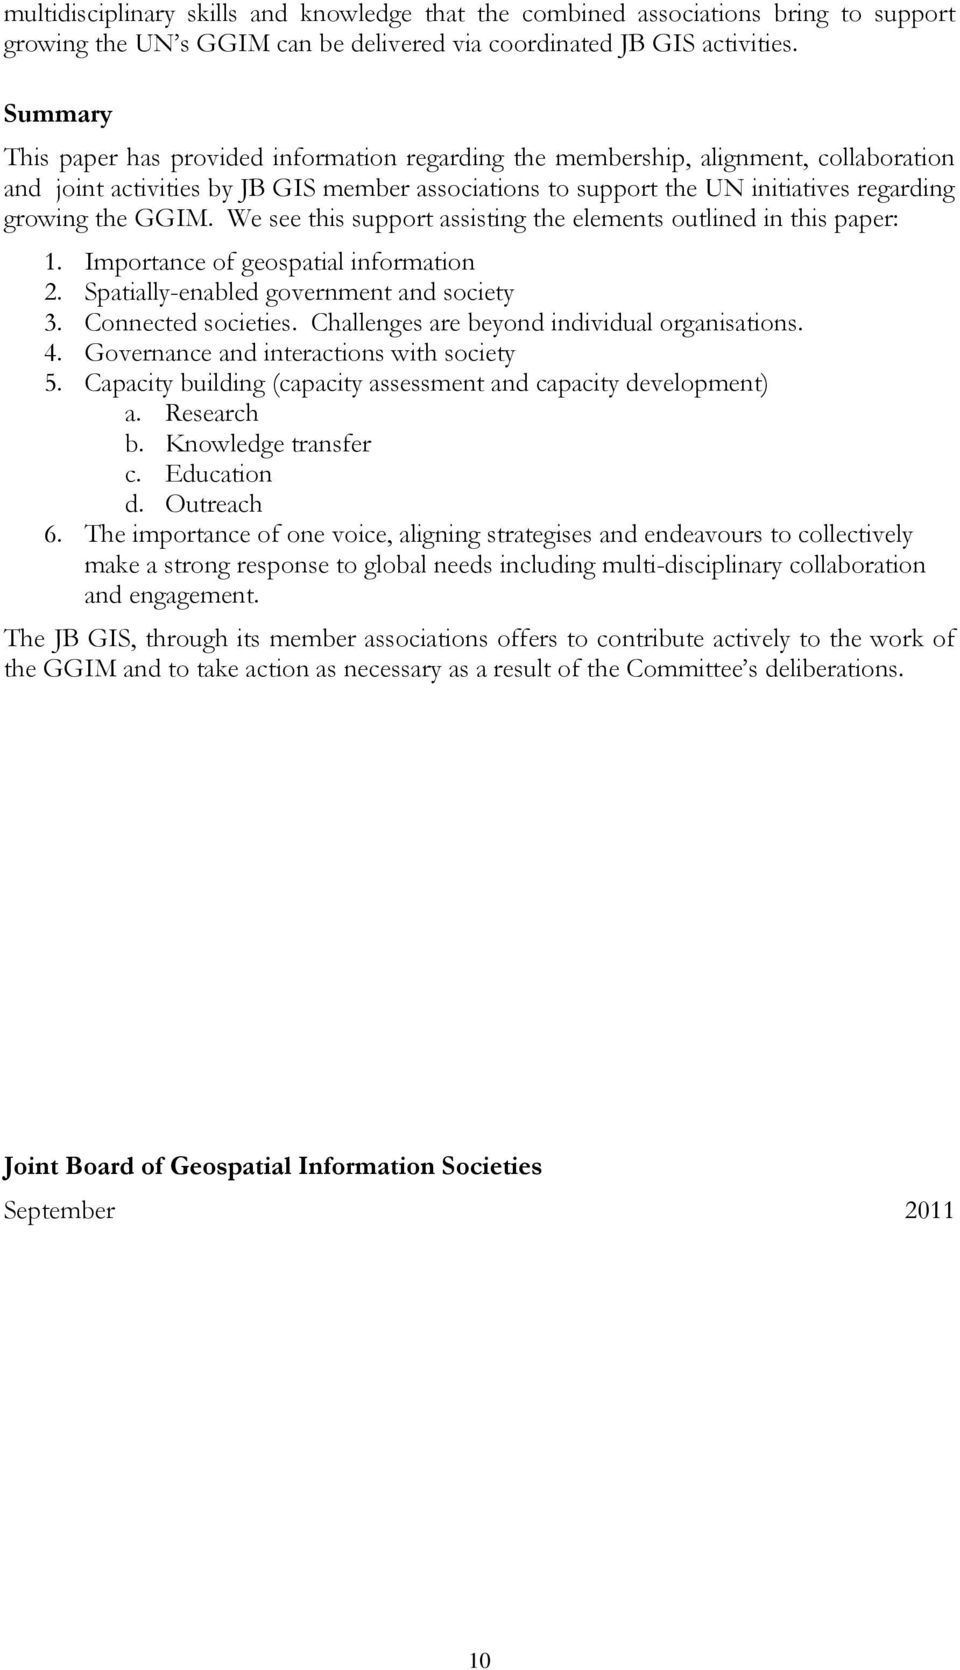 GGIM. We see this support assisting the elements outlined in this paper: 1. Importance of geospatial information 2. Spatially-enabled government and society 3. Connected societies.